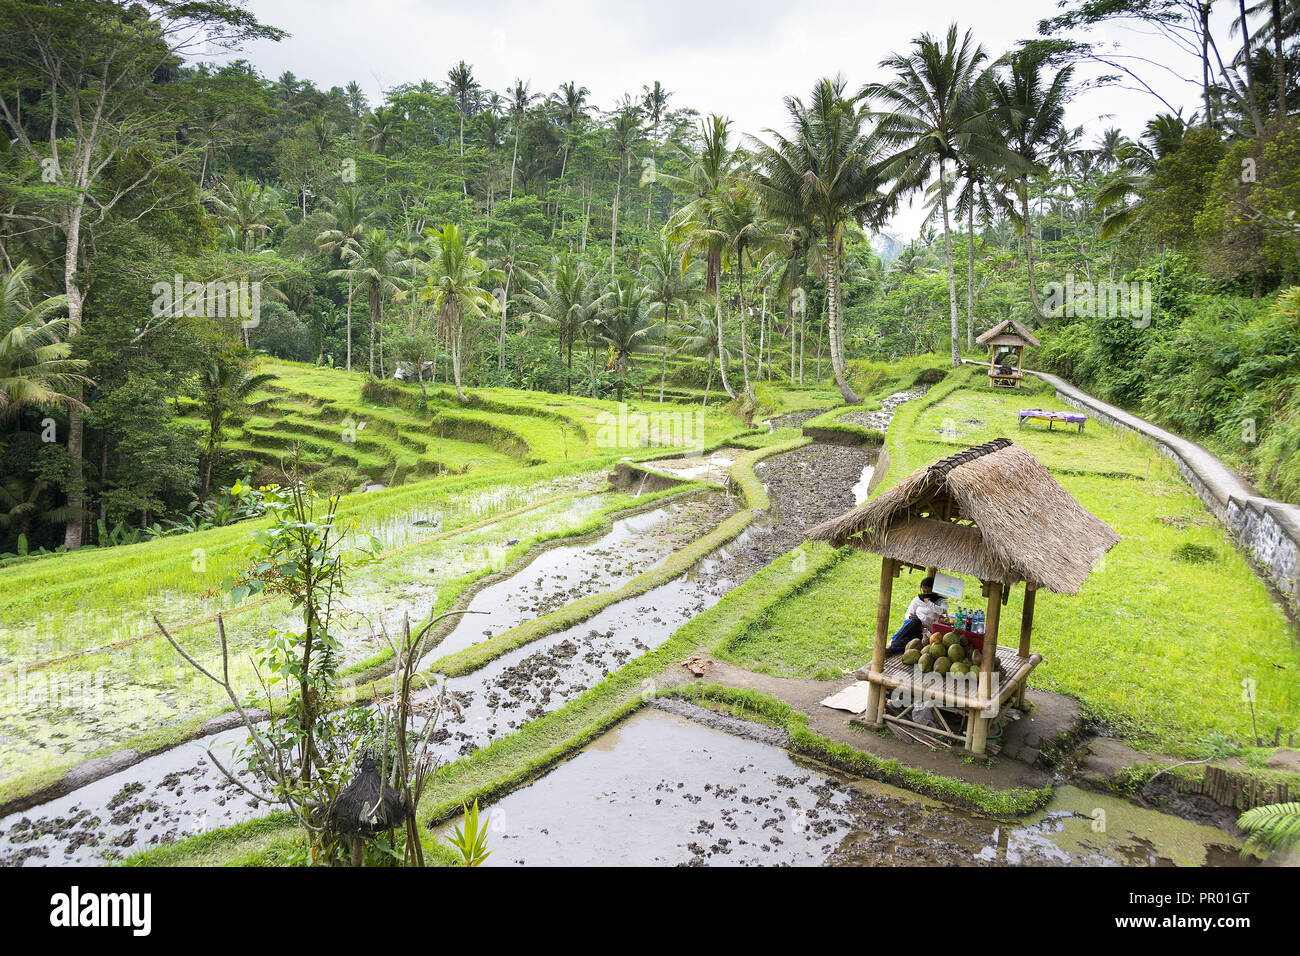 Valley view at Gunung Kawi, Bali showing rice paddy terraces and palm trees with woman selling produce. Stock Photo